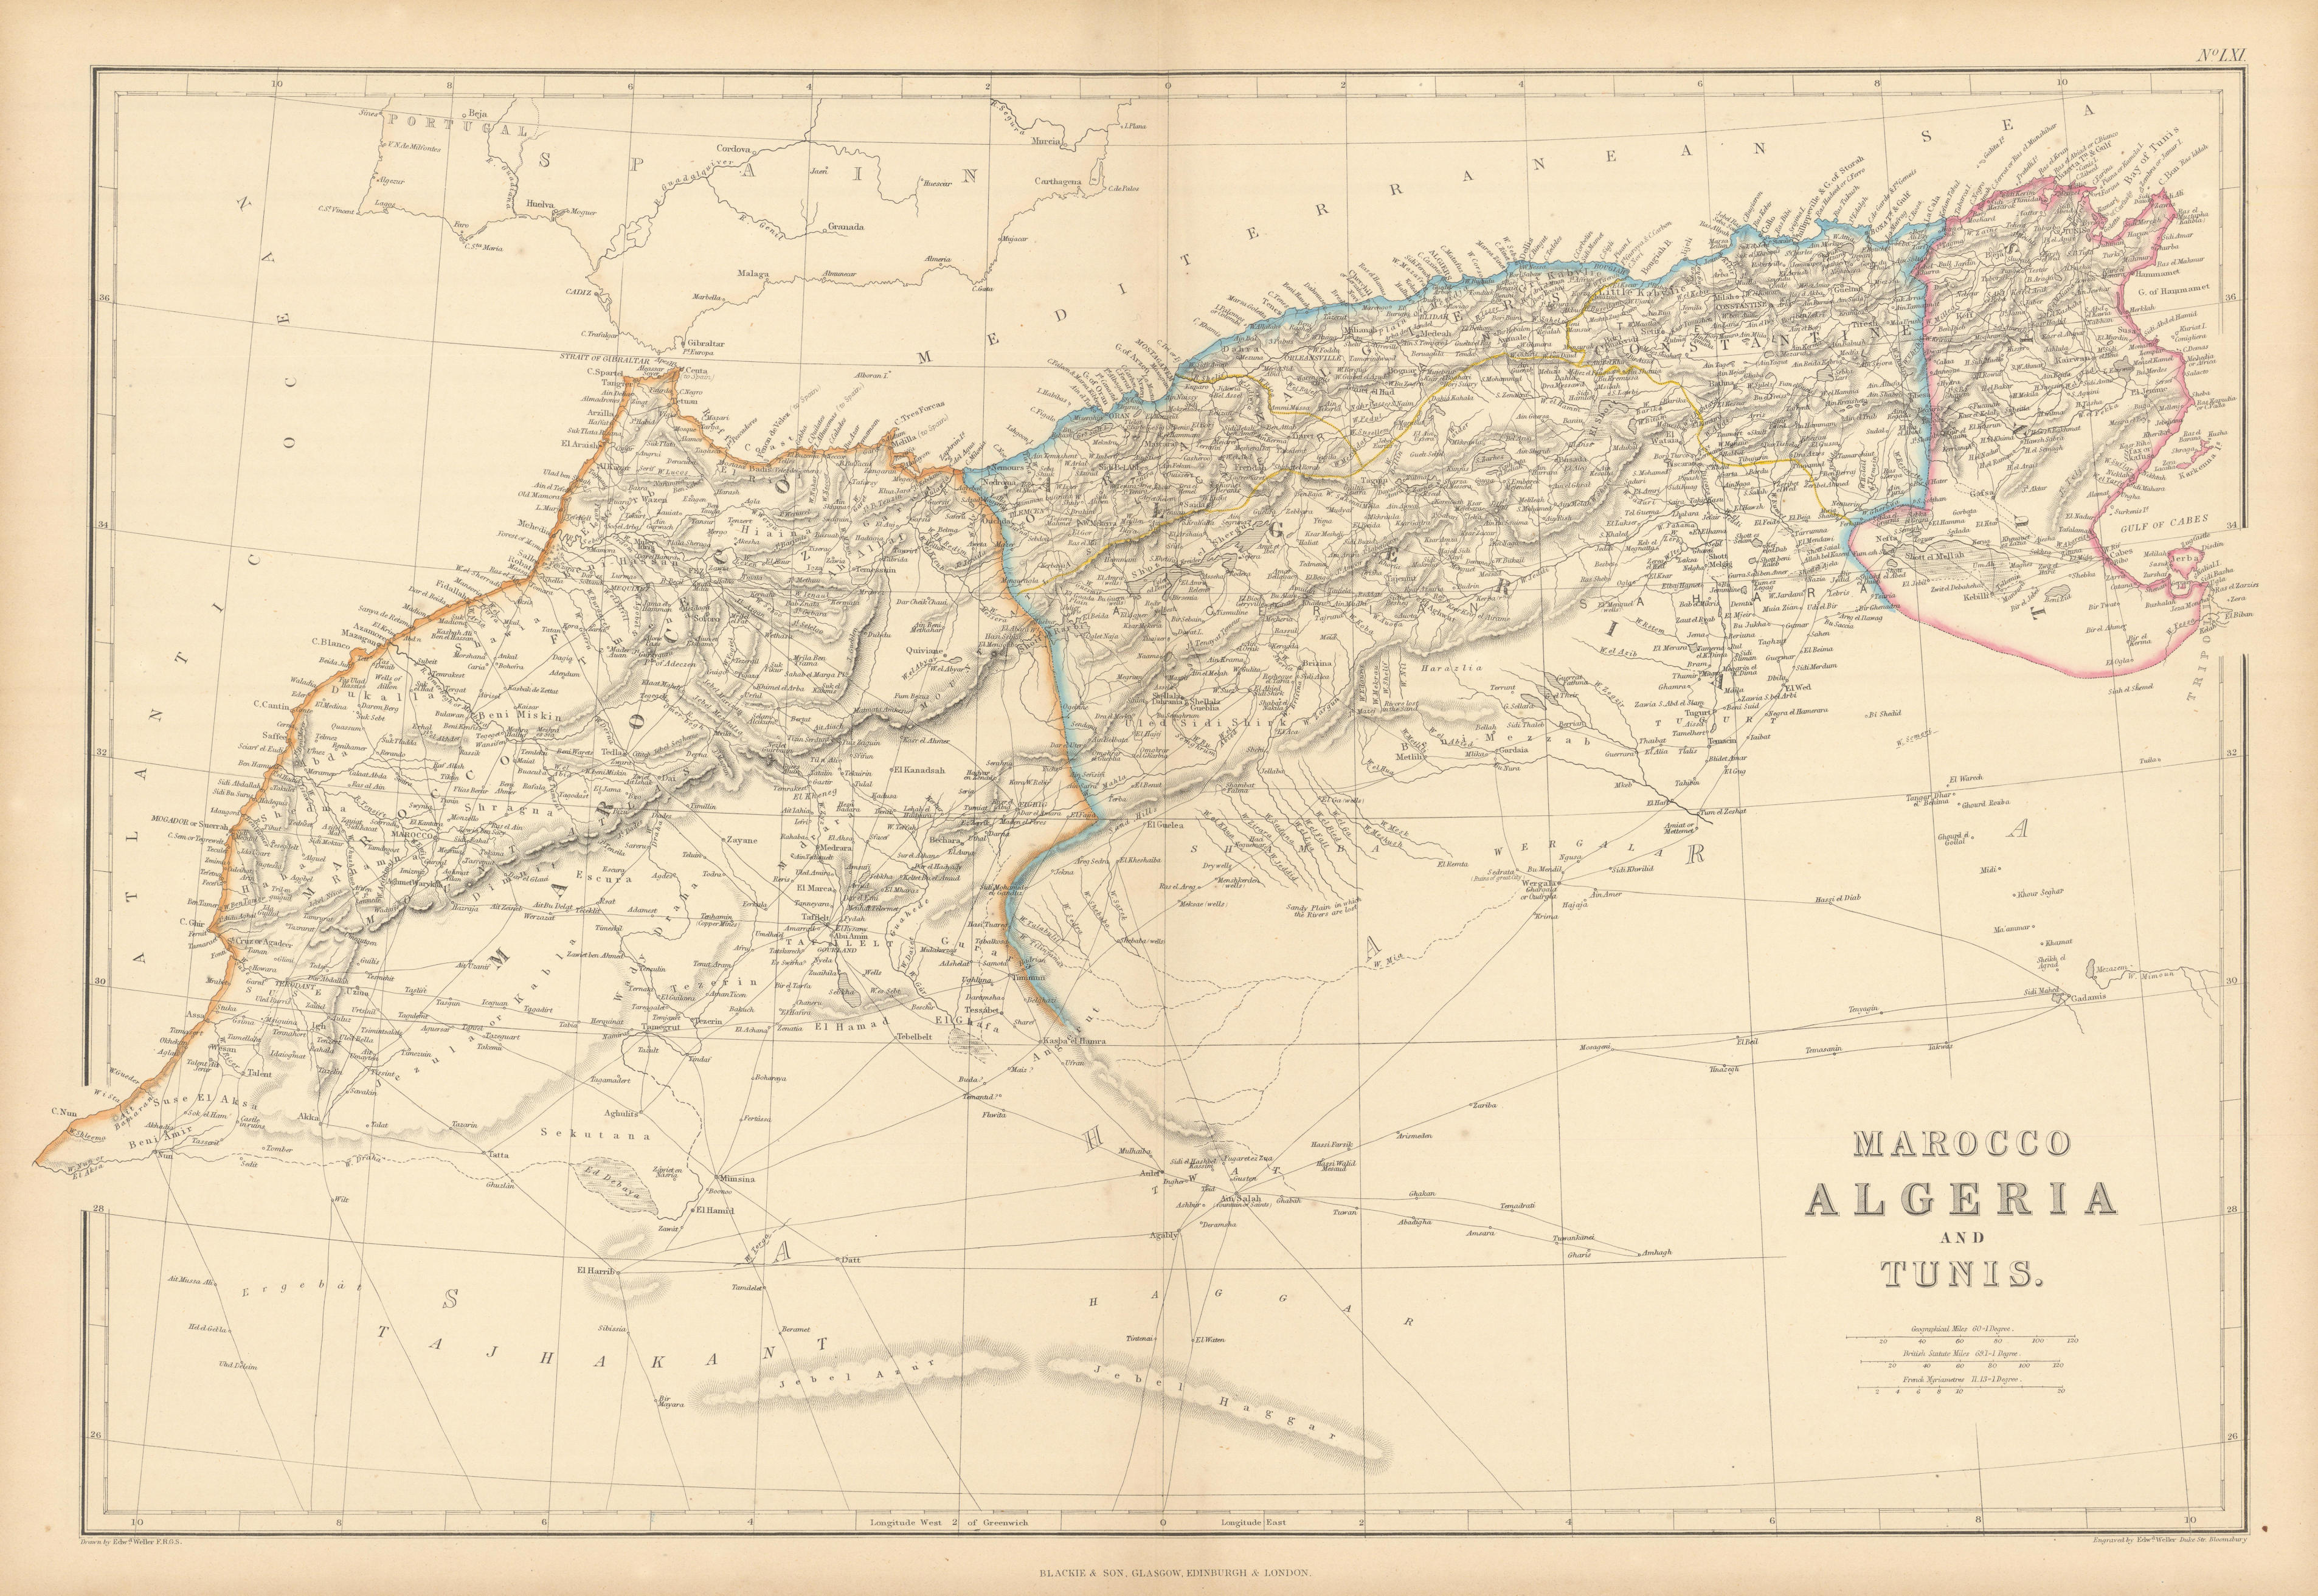 Marocco, Algeria and Tunis by Edward Weller. Morocco Maghreb 1859 old map